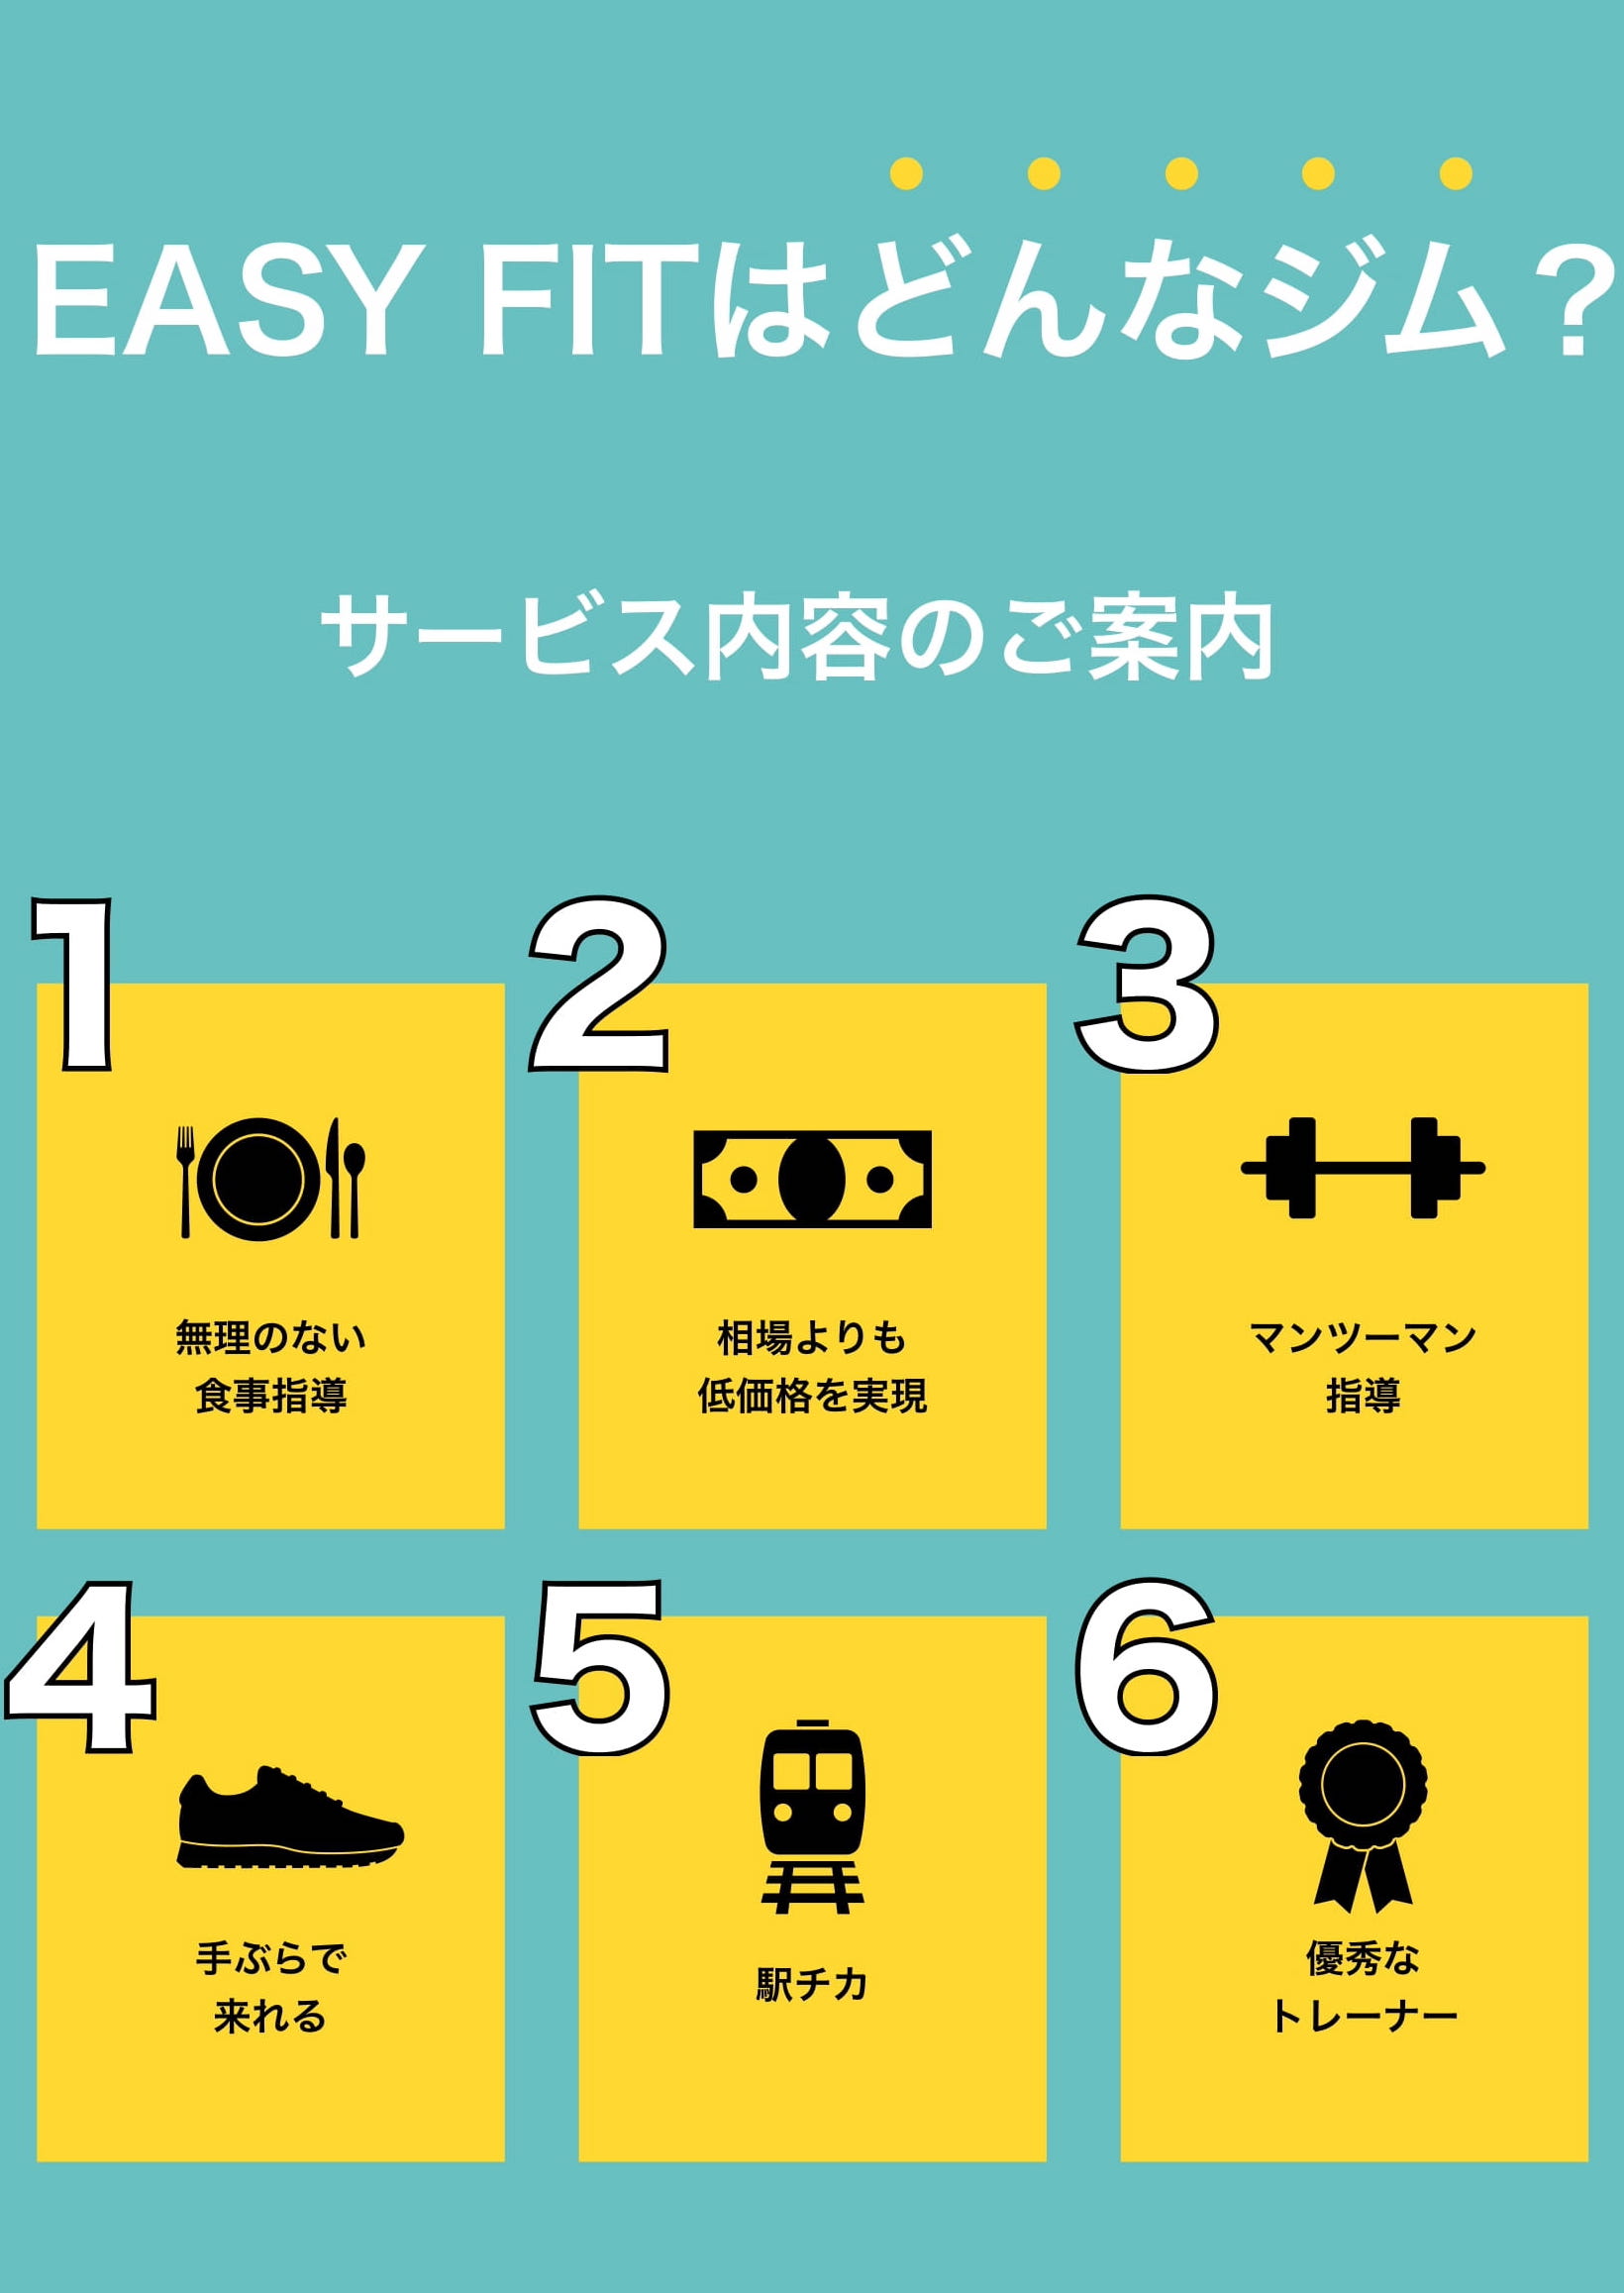 EASY FITの説明